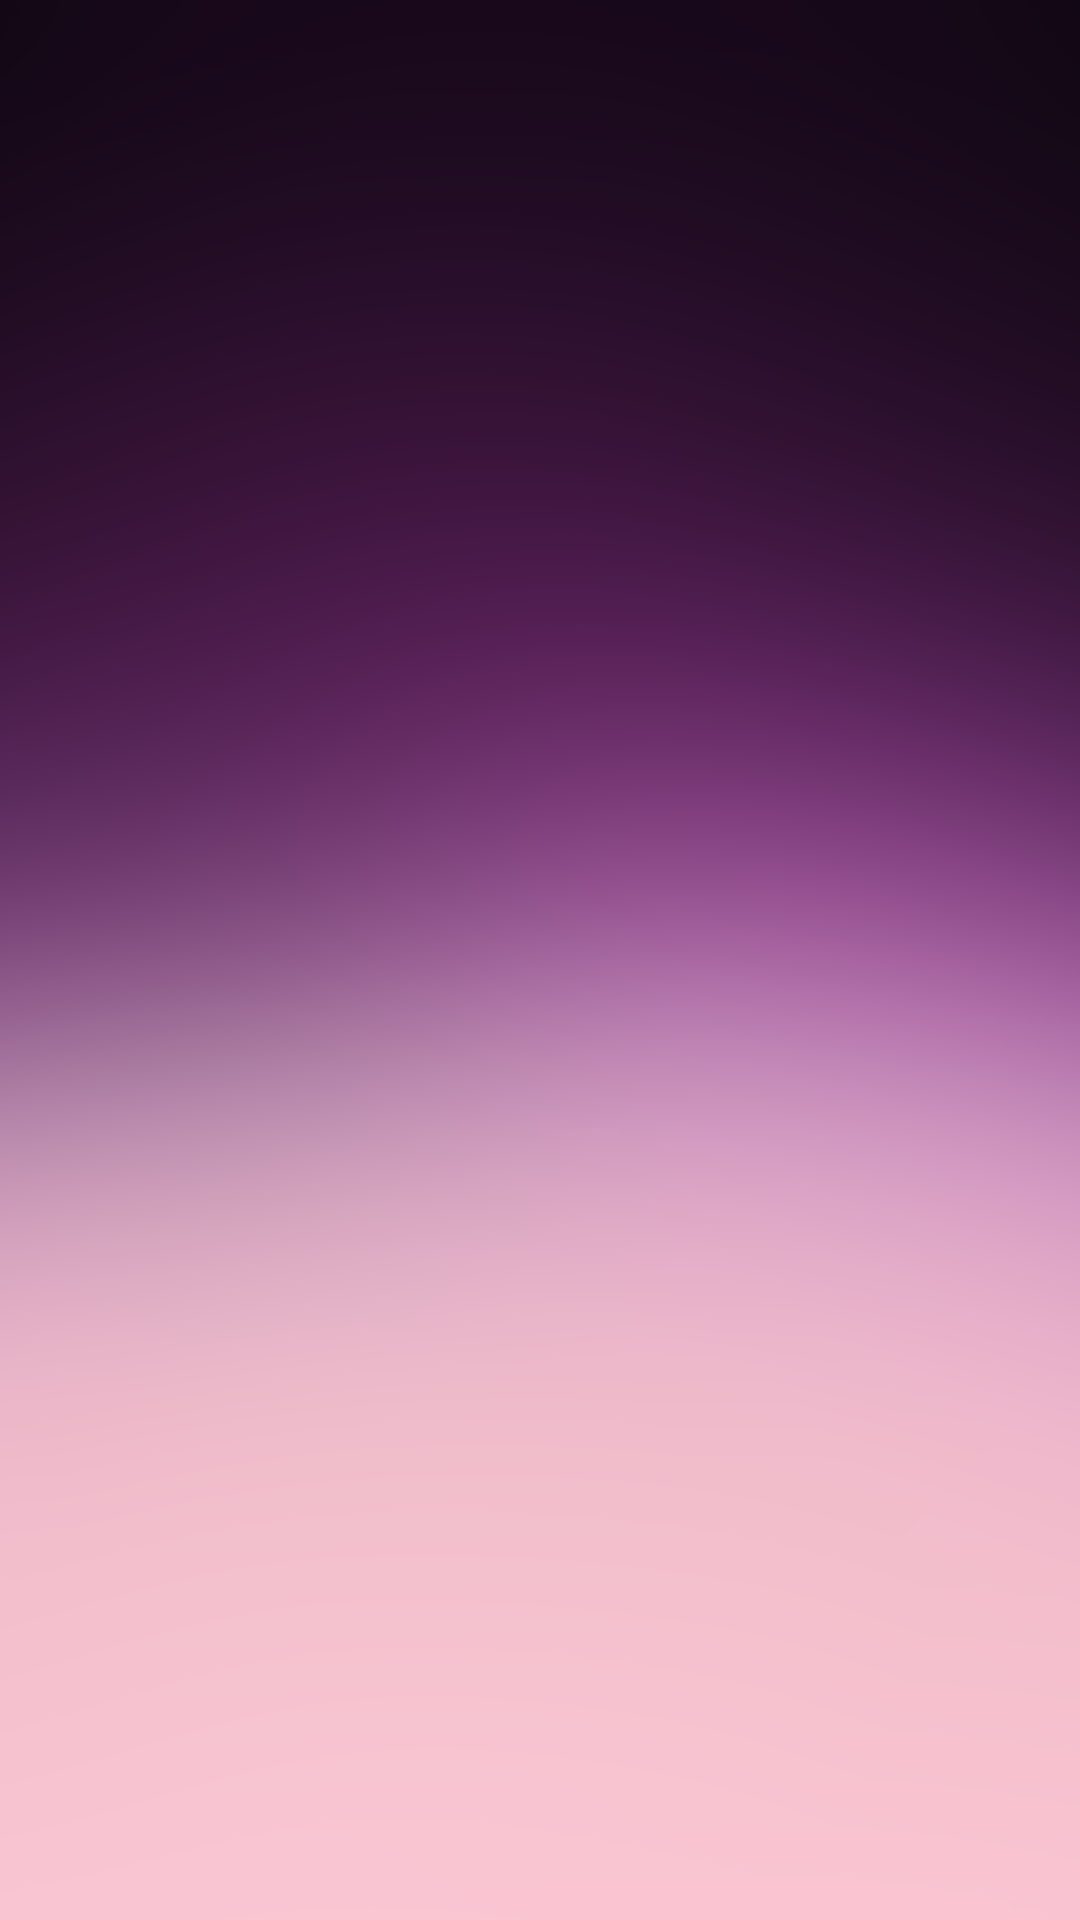 1080x1920 Purple Pink Gradient Simple Android Wallpaper ...